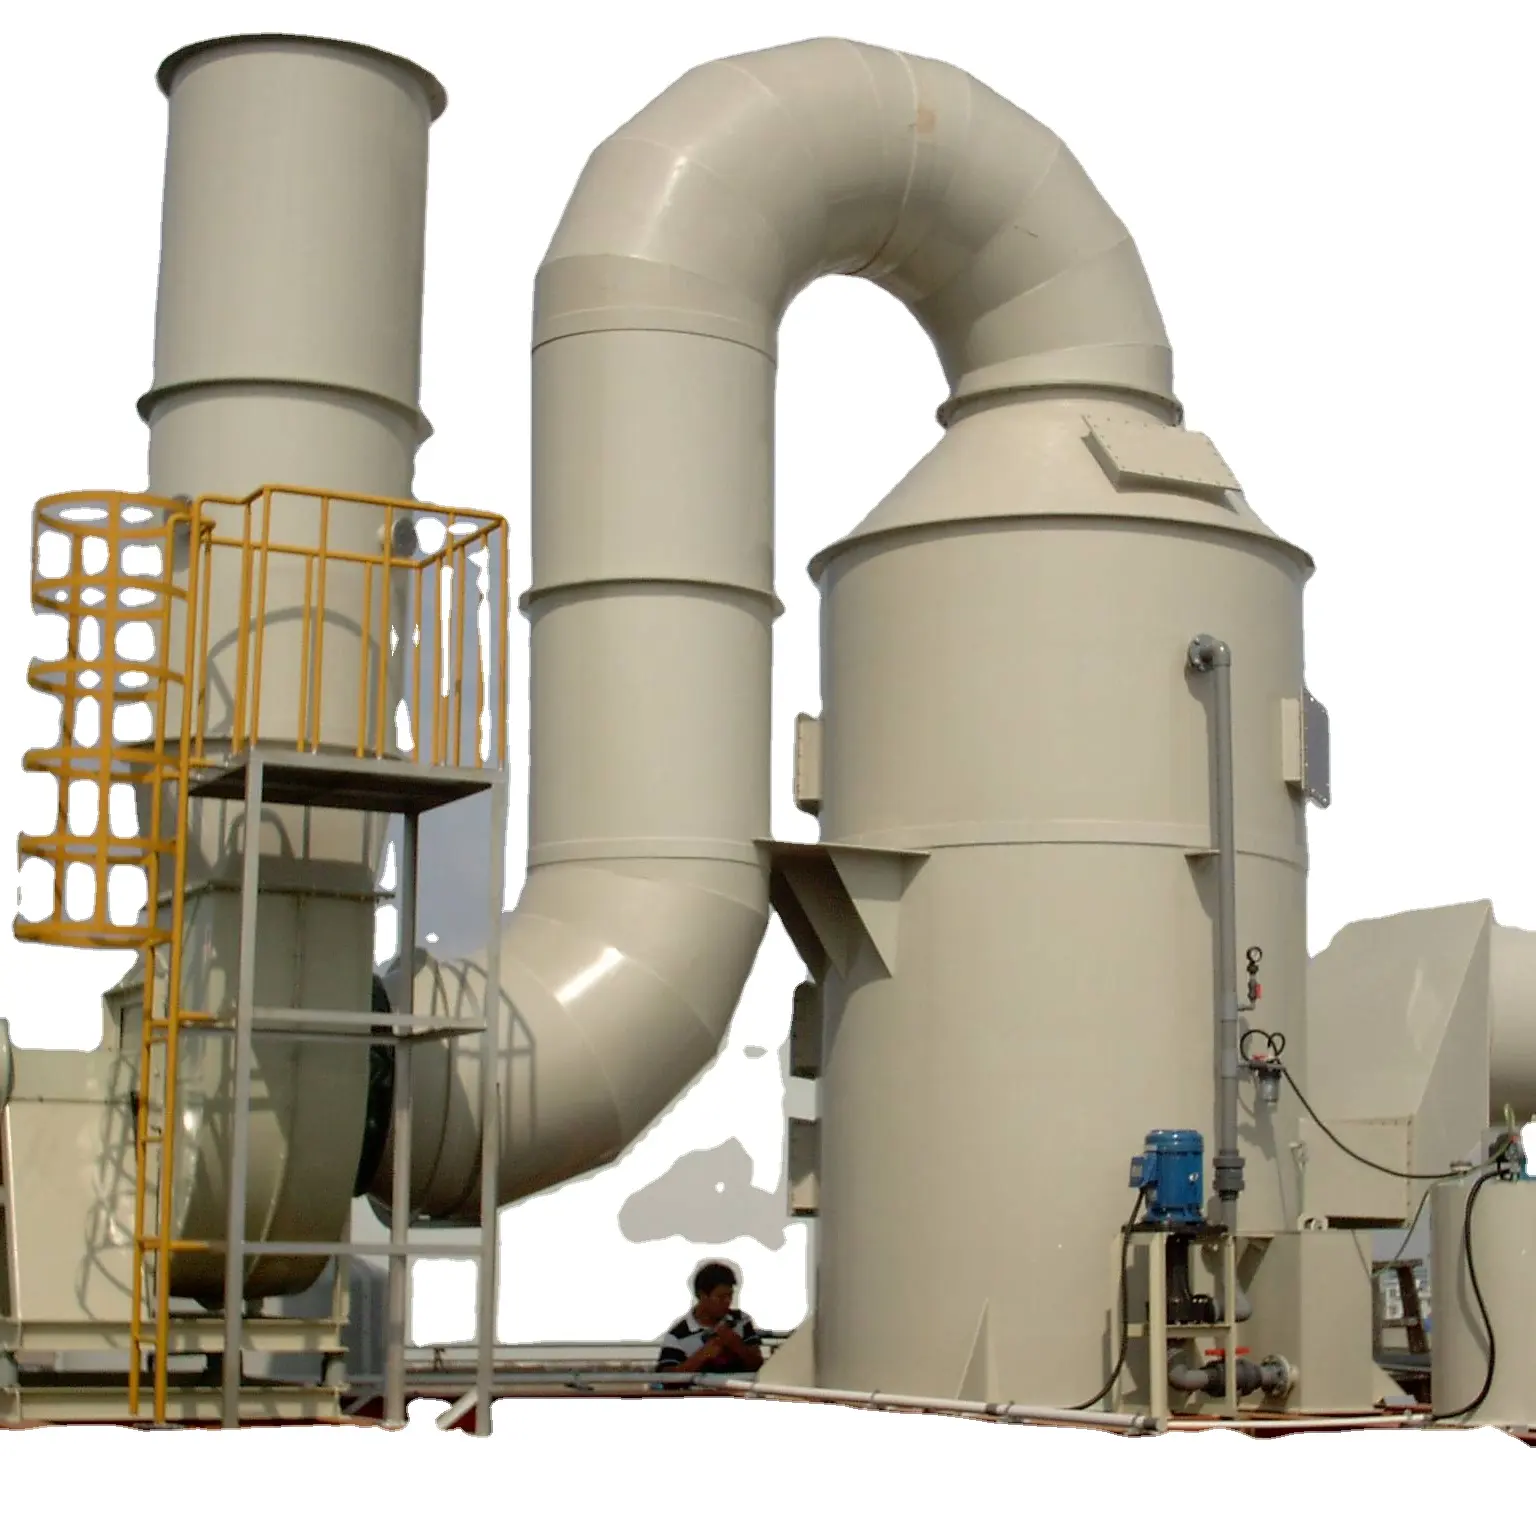 waste gas treatment spray tower design cyclone HCL h2s nh3 so2 biogas chlorine hydrocarbon sulfuric acid fume gas scrubber